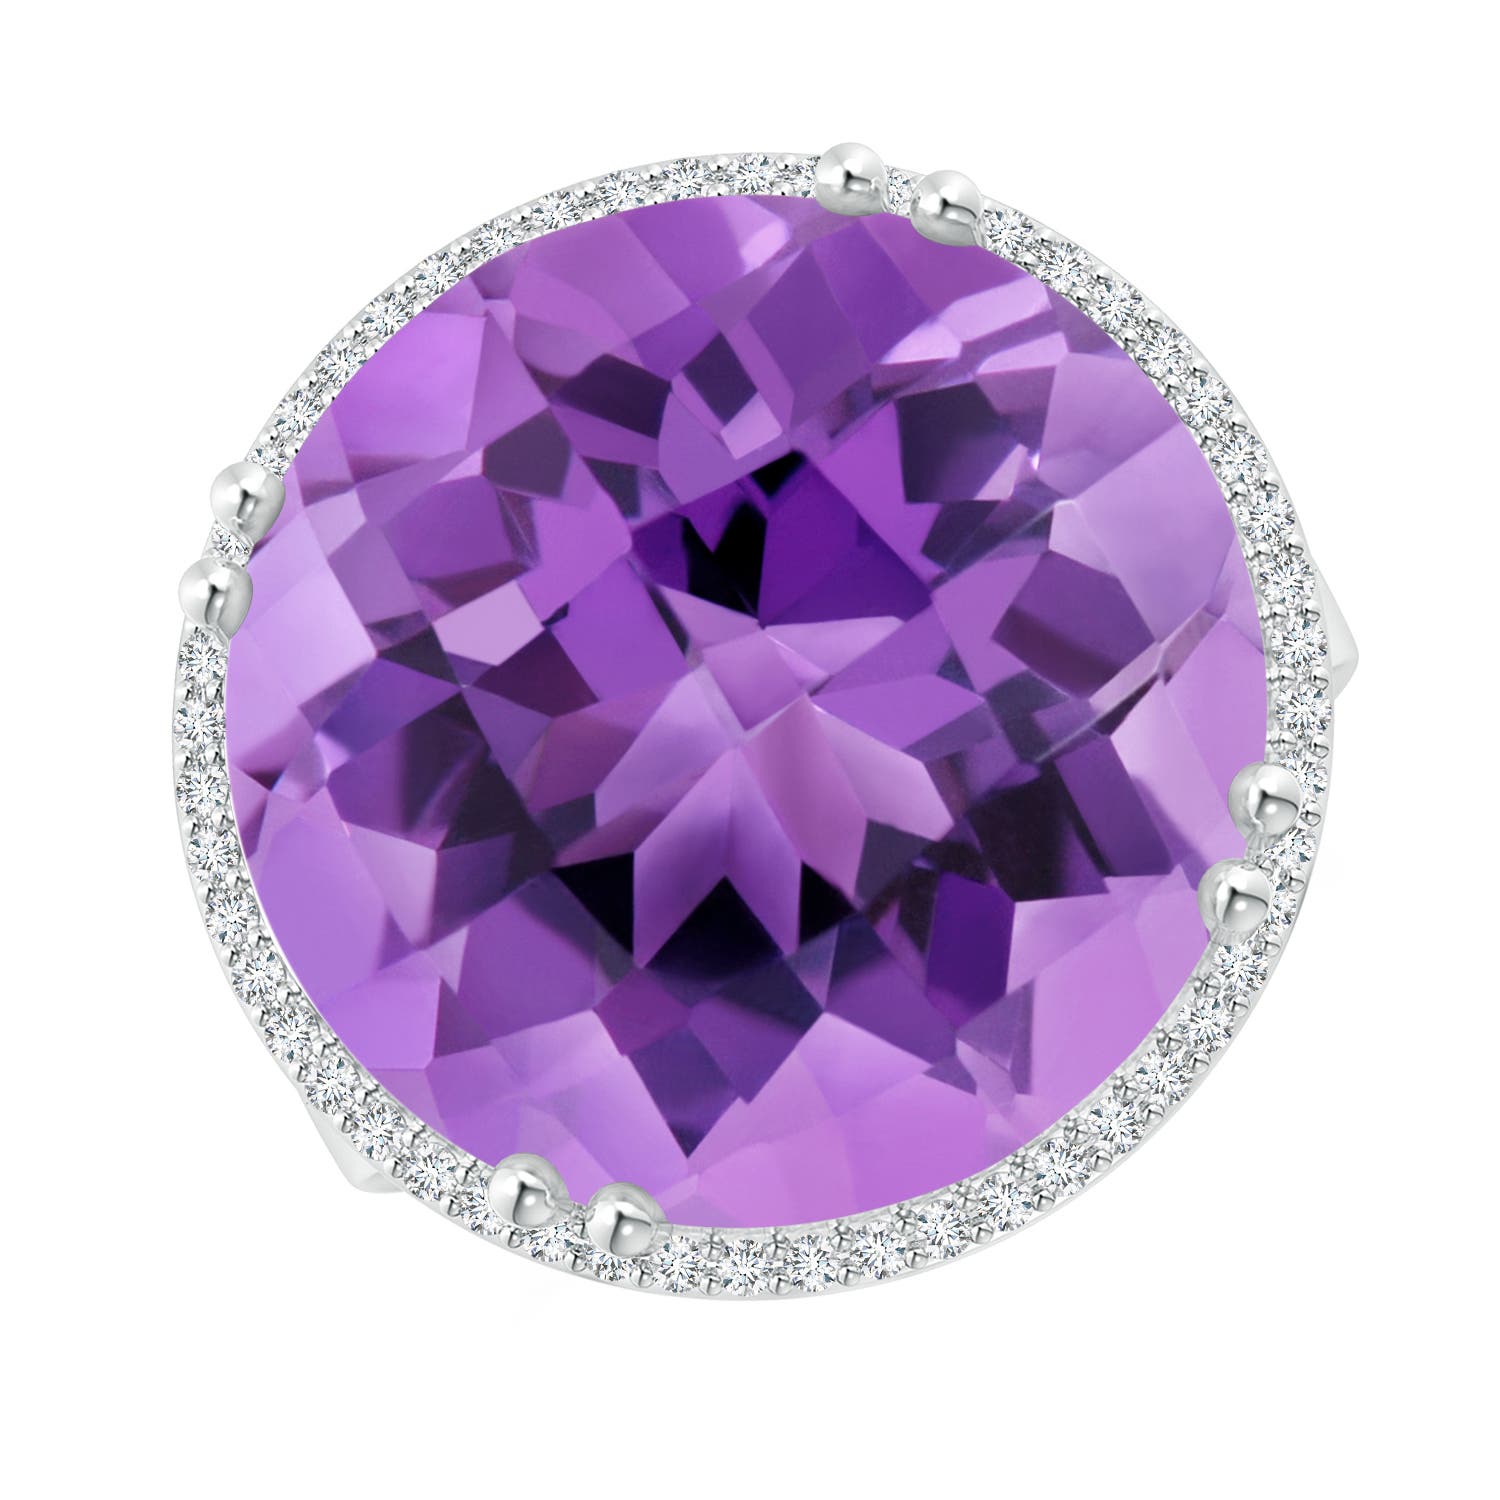 AA - Amethyst / 18.23 CT / 14 KT White Gold